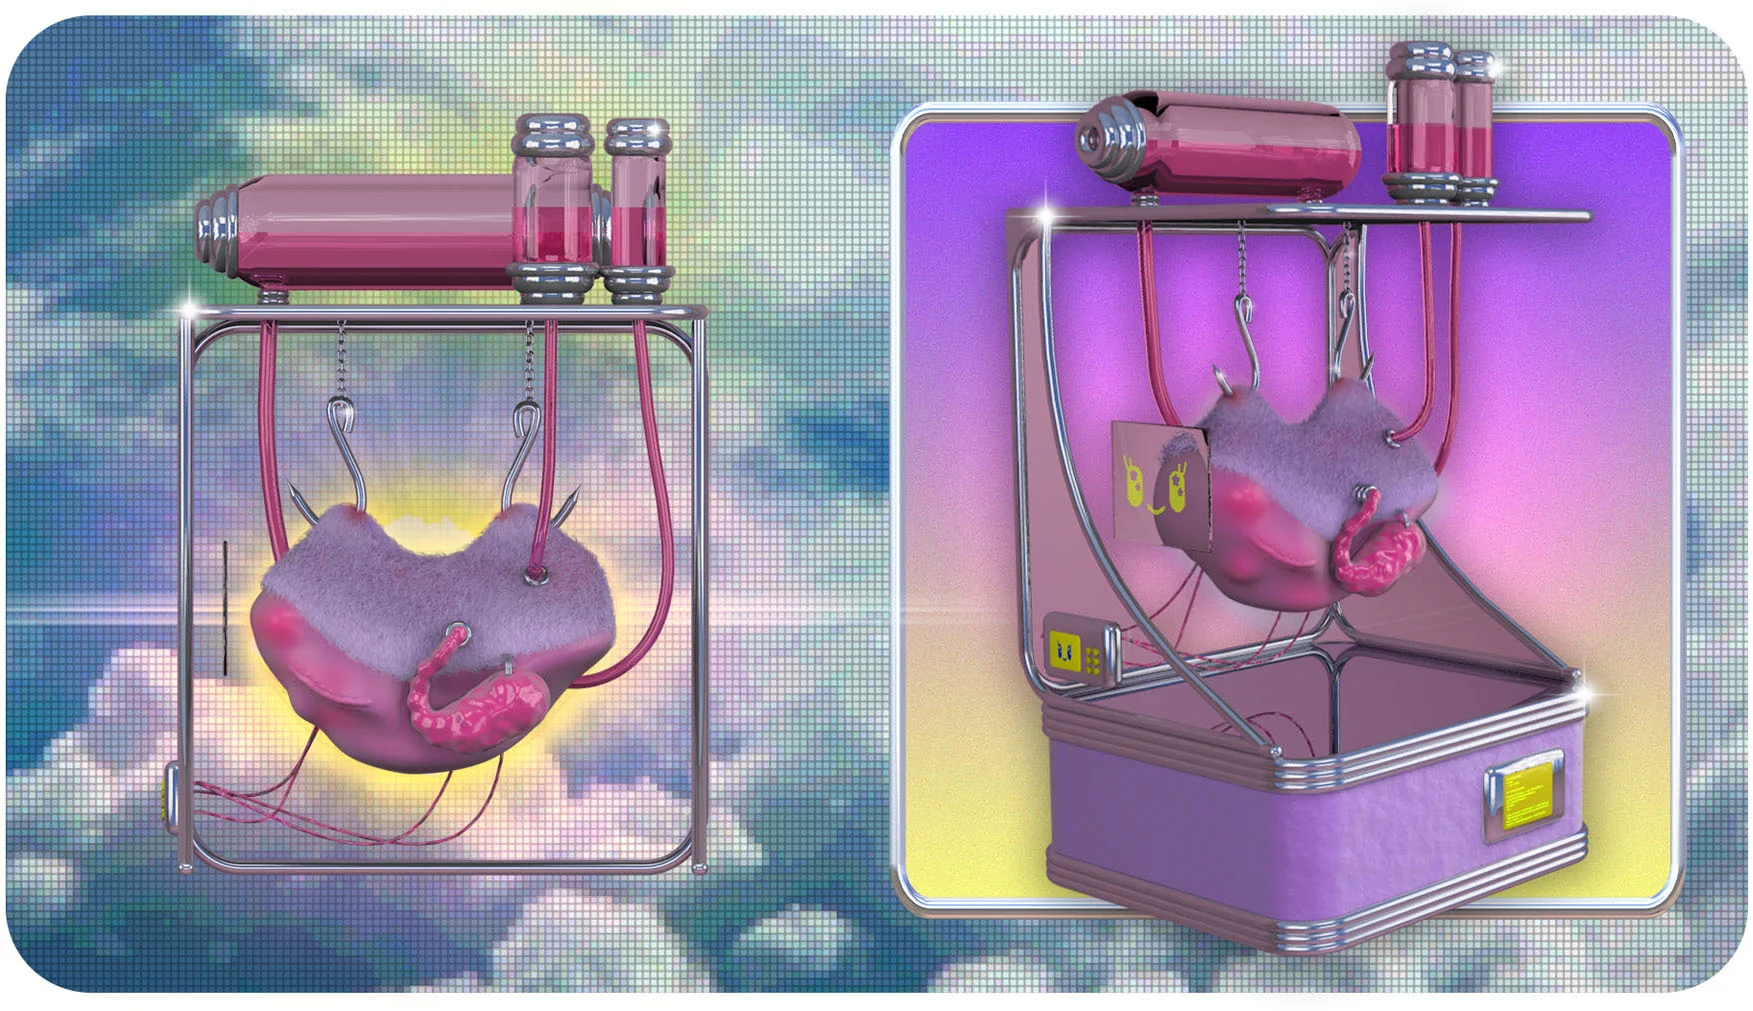 A CGI illustration showing two perspectives of a purple and metallic cage with two sharp meat hooks hanging from its roof. The meat hooks are holding a reddish creature with purple fur in the air. Above the cage, glass containers hold red liquid, with tubes extending from them to the creature. In front of the creature hovers a screen displaying a cute, smiling face.